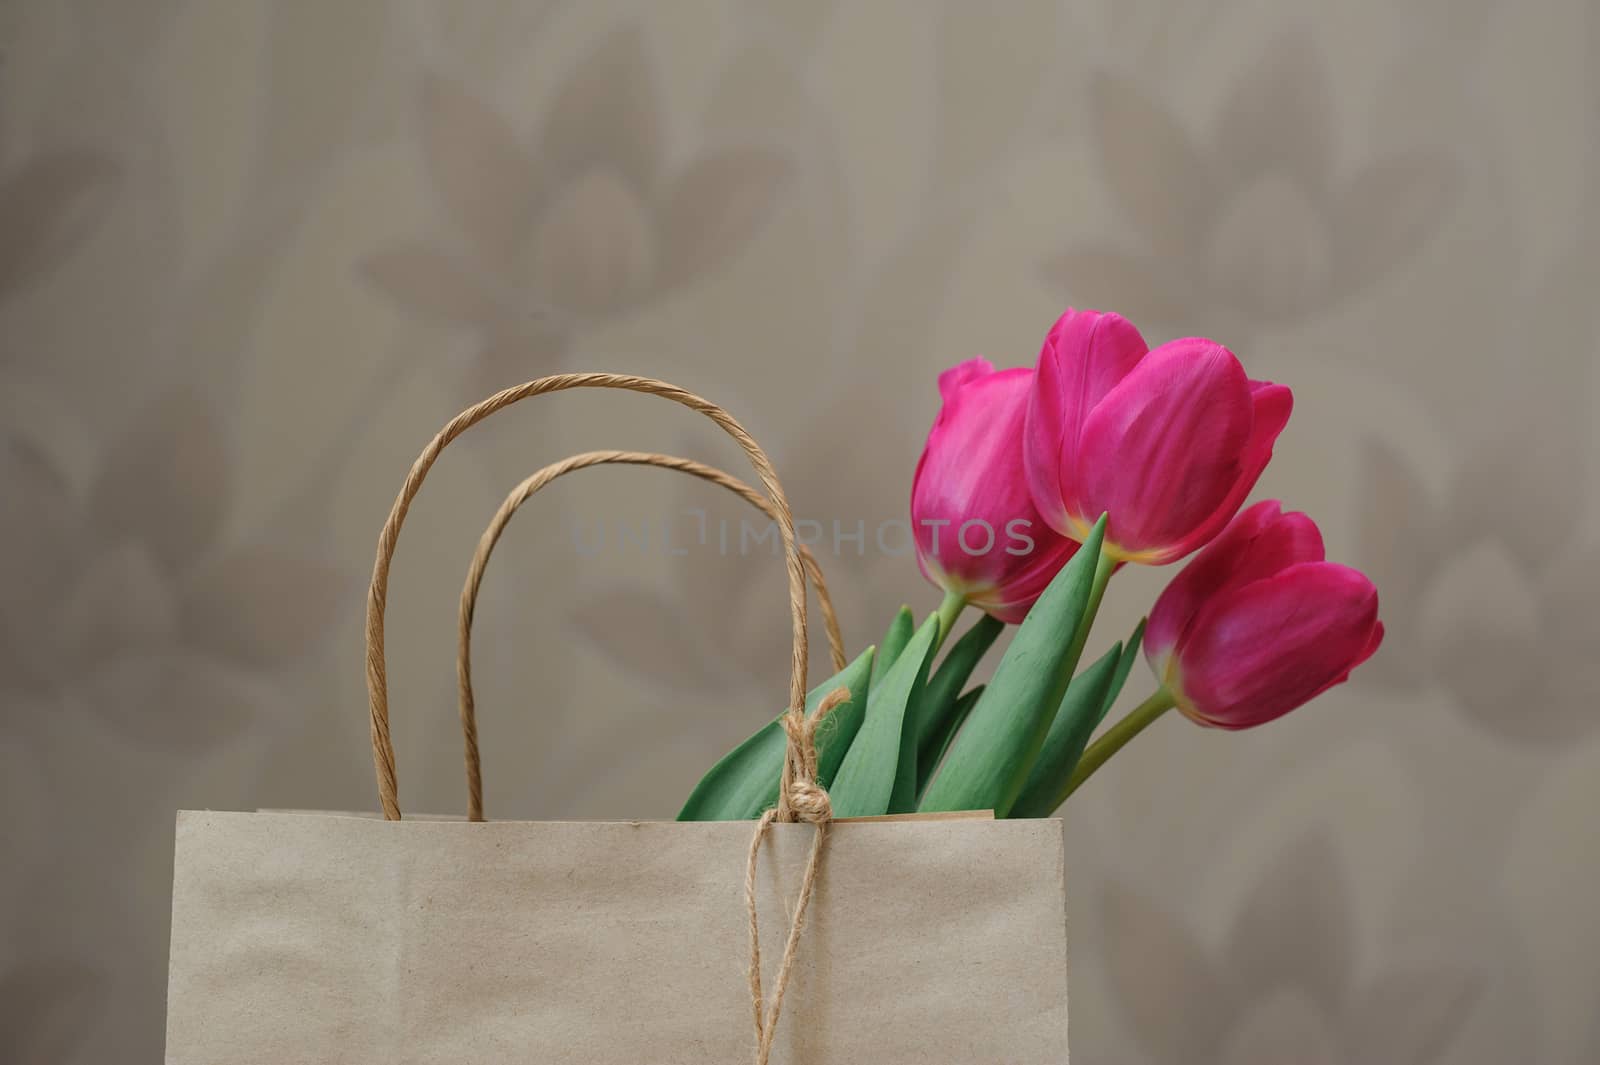 bouquet of red tulips in paper bag by timonko